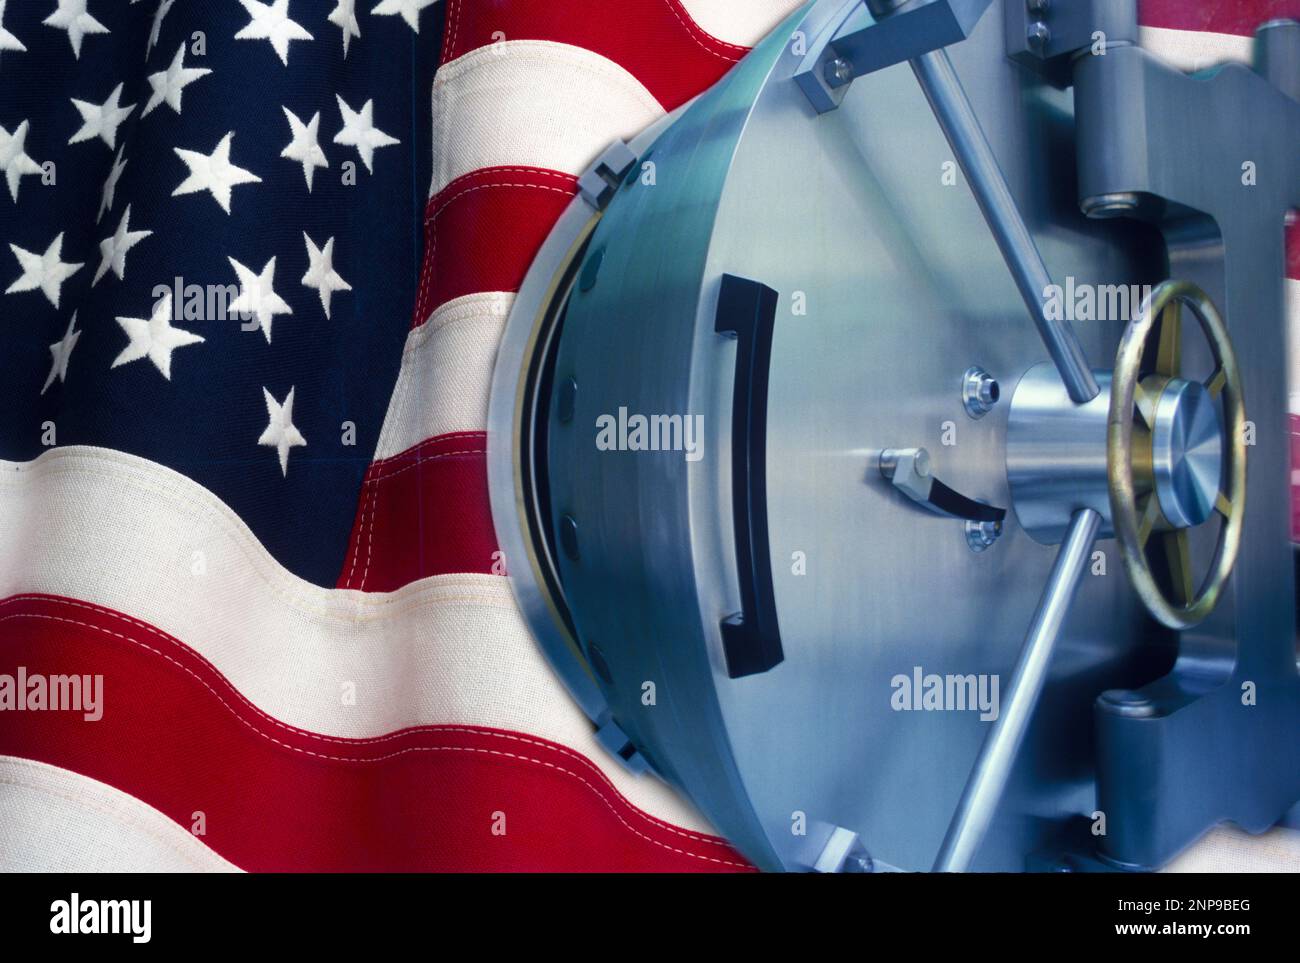 OPEN BANK SAFE VAULT DOOR WITH WALL OF UNITED STATES OF AMERICA FLAG Stock Photo